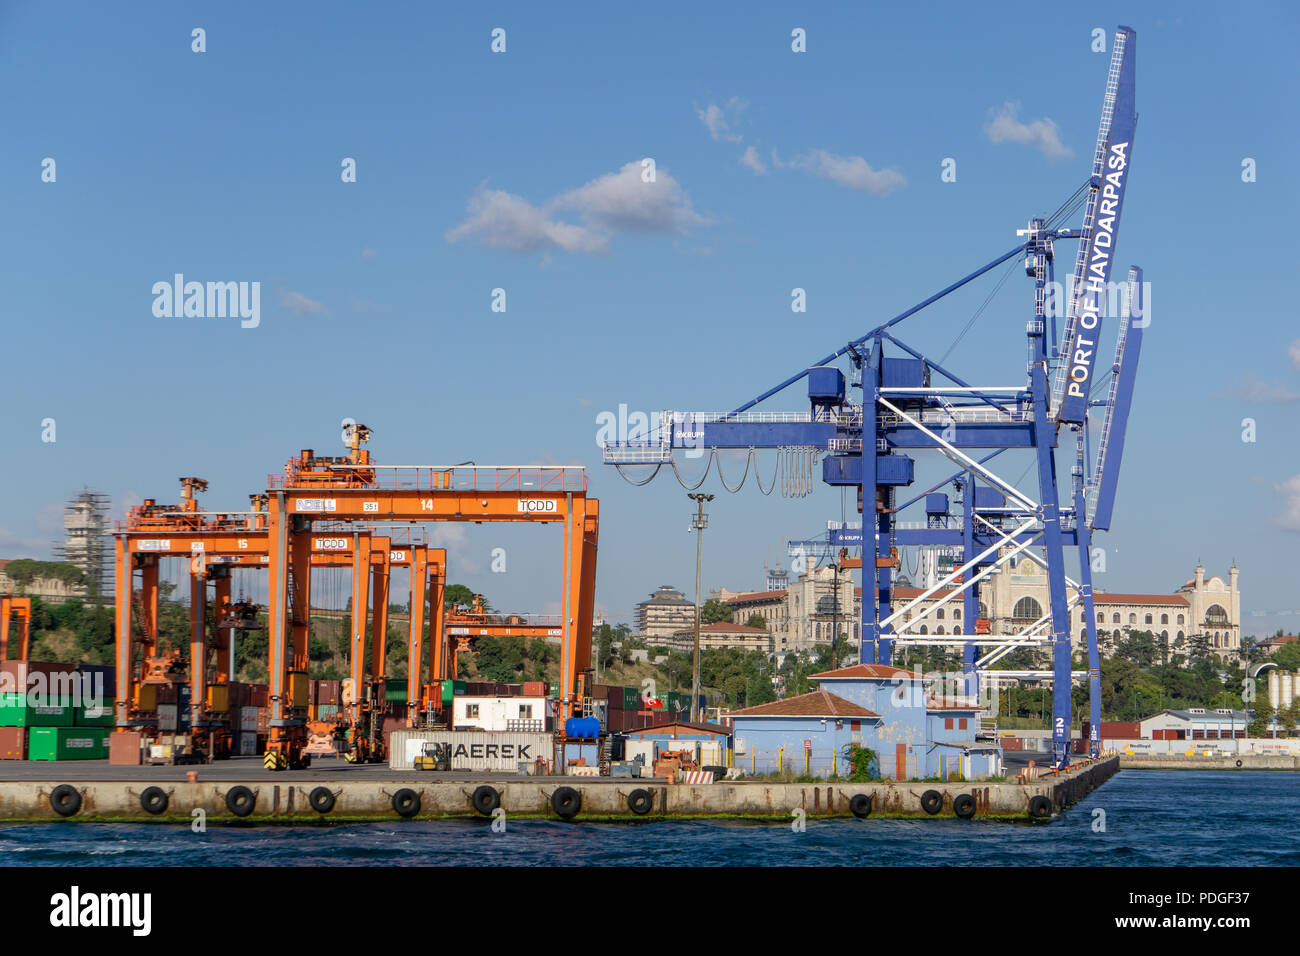 Haydarpaşa port scene in Istanbul Kadıköy with cranes which seem ready for new loadings and ships. Stock Photo